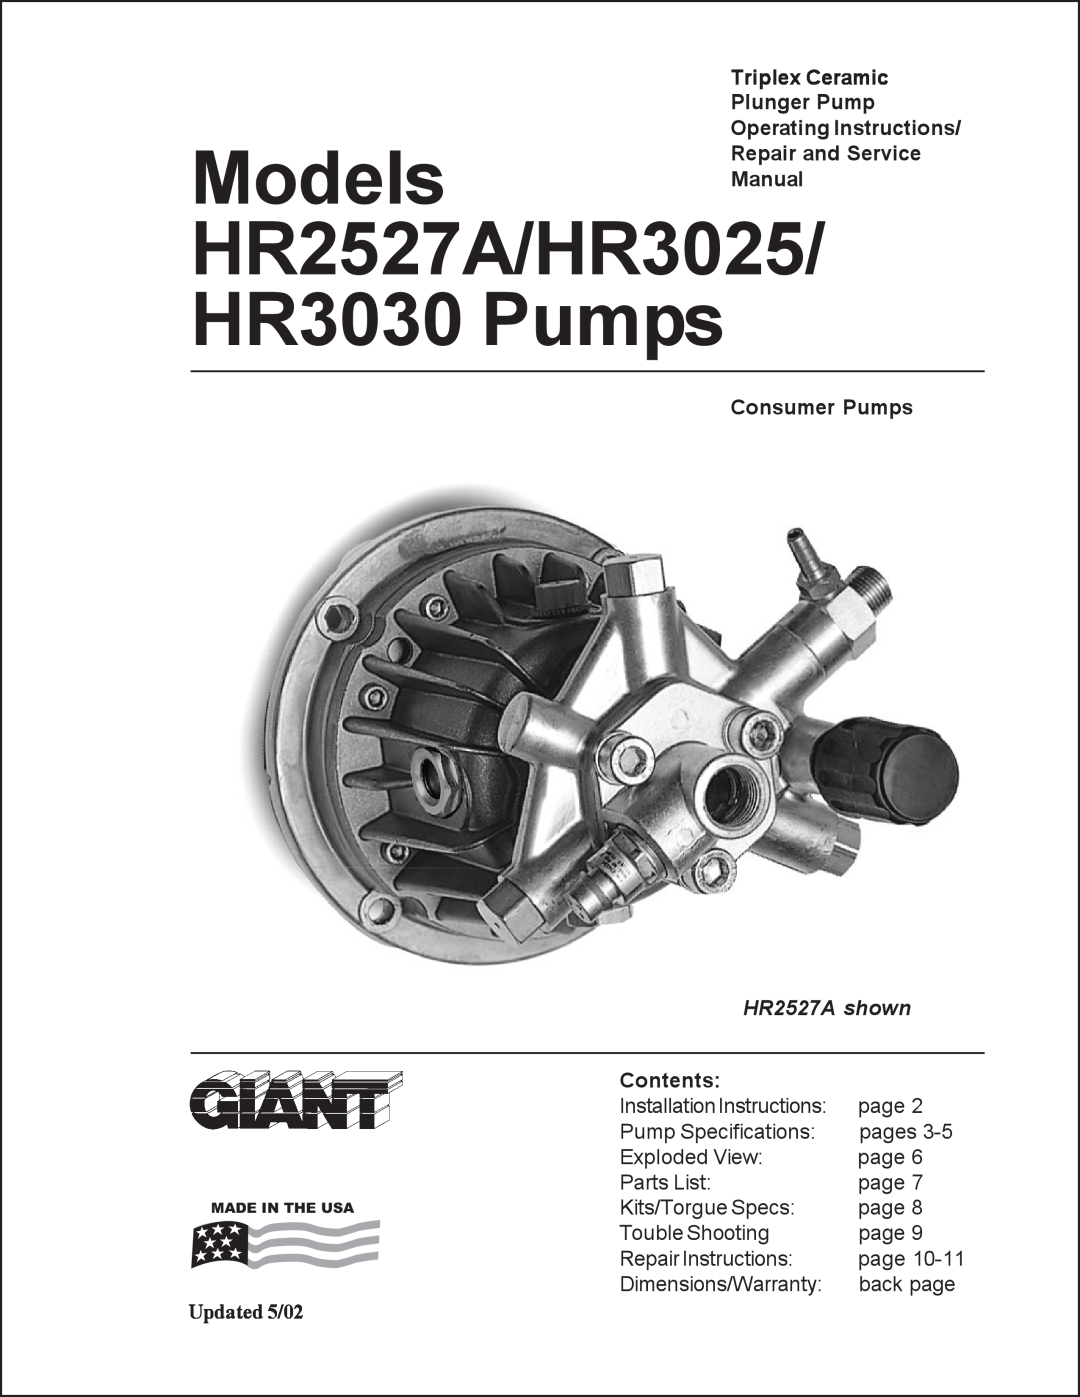 Giant operating instructions HR2527A/HR3025/ HR3030 Pumps, Triplex Ceramic Plunger Pump Operating Instructions 